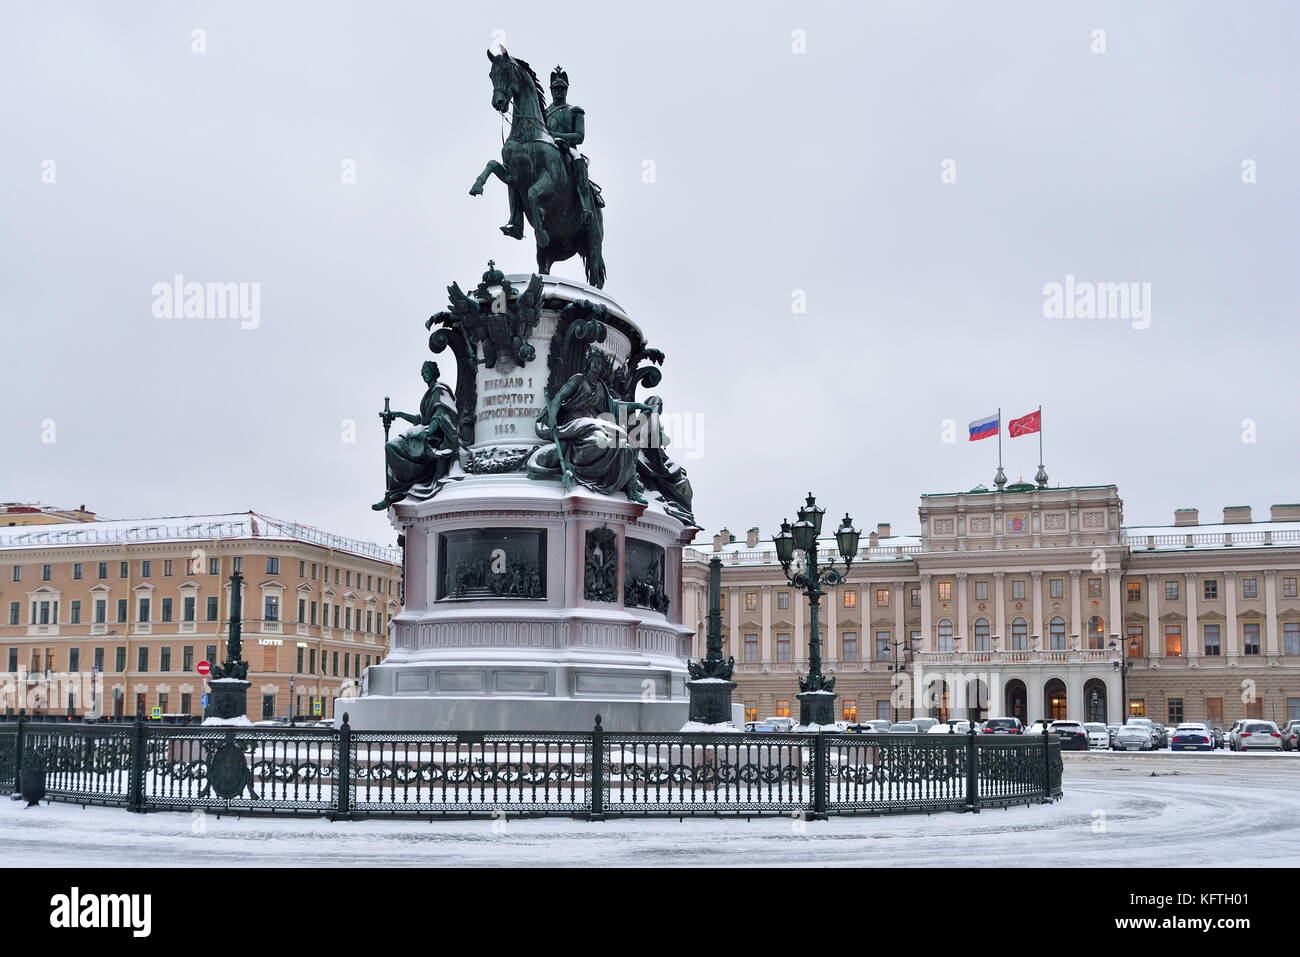 SAINT PETERSBURG, RUSSIA - 12 JANUARY 2017: Monument to Nicholas 1 St. Isaac's square in winter Stock Photo